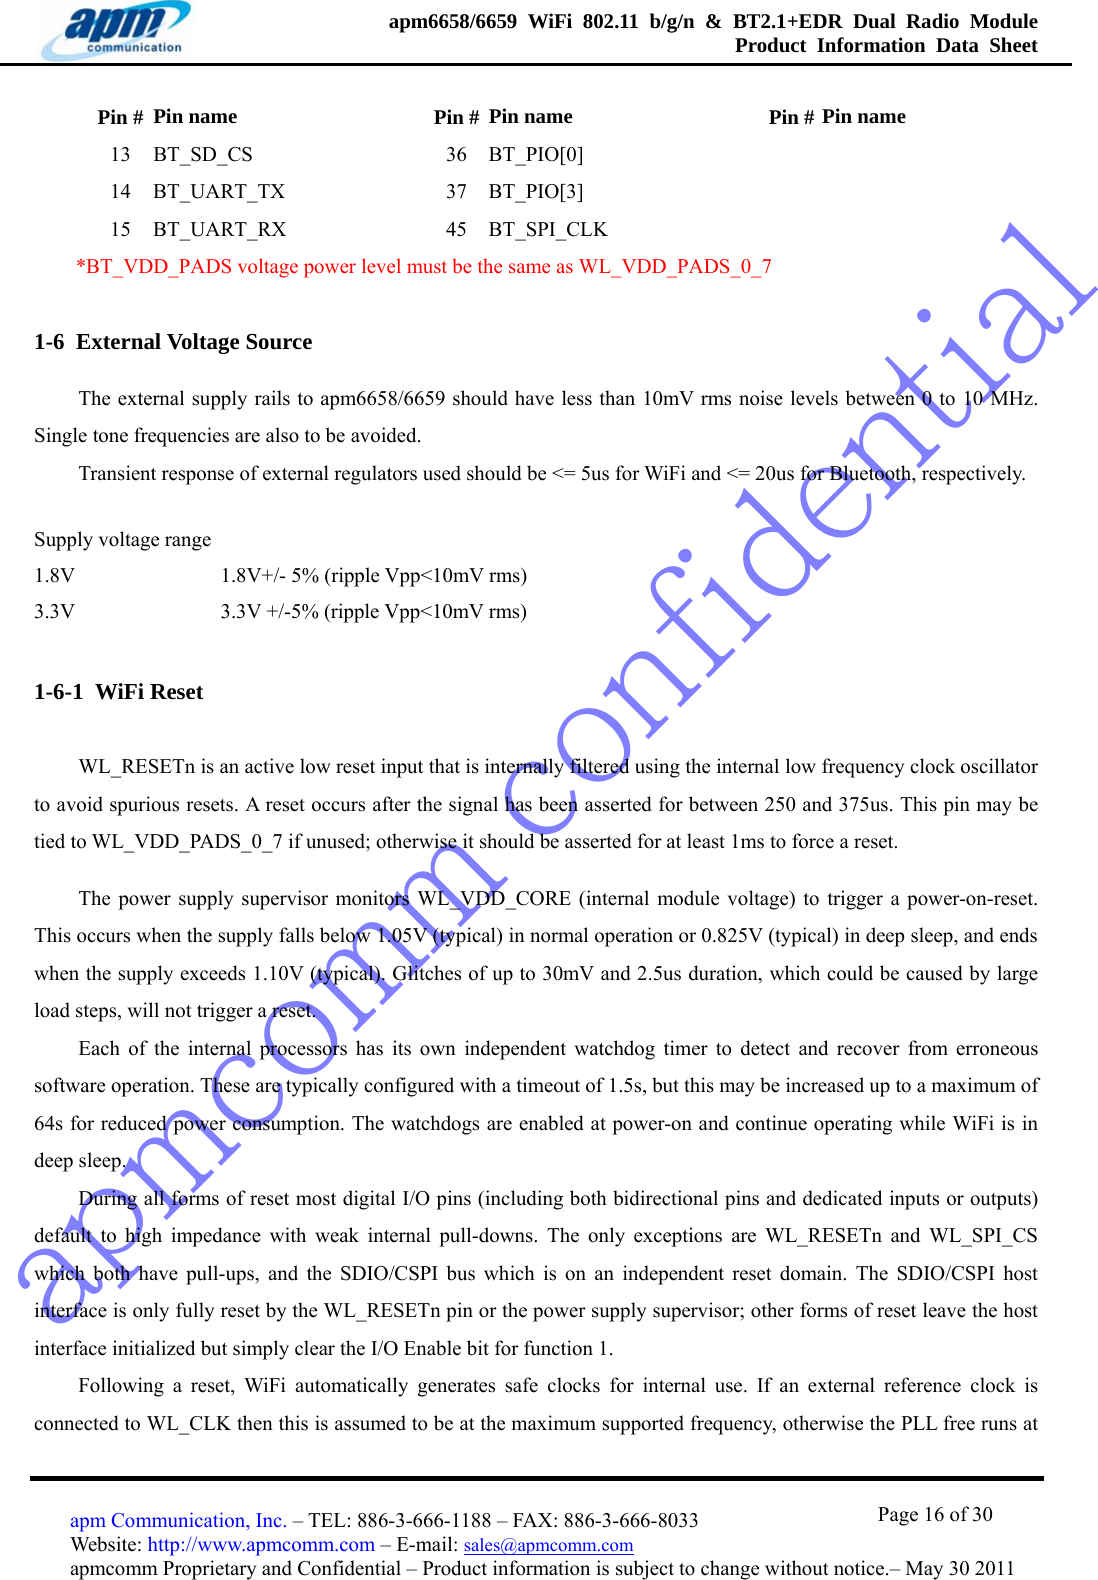 apmcomm confidentialapm6658/6659 WiFi 802.11 b/g/n &amp; BT2.1+EDR Dual Radio Module  Product Information Data Sheet                                       Page 16 of 30 apm Communication, Inc. – TEL: 886-3-666-1188 – FAX: 886-3-666-8033 Website: http://www.apmcomm.com – E-mail: sales@apmcomm.com  apmcomm Proprietary and Confidential – Product information is subject to change without notice.– May 30 2011 Pin #  Pin name    Pin # Pin name   Pin # Pin name 13 BT_SD_CS   36 BT_PIO[0]     14 BT_UART_TX   37 BT_PIO[3]     15 BT_UART_RX   45 BT_SPI_CLK     *BT_VDD_PADS voltage power level must be the same as WL_VDD_PADS_0_7 1-6  External Voltage Source The external supply rails to apm6658/6659 should have less than 10mV rms noise levels between 0 to 10 MHz. Single tone frequencies are also to be avoided.   Transient response of external regulators used should be &lt;= 5us for WiFi and &lt;= 20us for Bluetooth, respectively.        Supply voltage range 1.8V              1.8V+/- 5% (ripple Vpp&lt;10mV rms) 3.3V              3.3V +/-5% (ripple Vpp&lt;10mV rms) 1-6-1  WiFi Reset WL_RESETn is an active low reset input that is internally filtered using the internal low frequency clock oscillator to avoid spurious resets. A reset occurs after the signal has been asserted for between 250 and 375us. This pin may be tied to WL_VDD_PADS_0_7 if unused; otherwise it should be asserted for at least 1ms to force a reset. The power supply supervisor monitors WL_VDD_CORE (internal module voltage) to trigger a power-on-reset. This occurs when the supply falls below 1.05V (typical) in normal operation or 0.825V (typical) in deep sleep, and ends when the supply exceeds 1.10V (typical). Glitches of up to 30mV and 2.5us duration, which could be caused by large load steps, will not trigger a reset. Each of the internal processors has its own independent watchdog timer to detect and recover from erroneous software operation. These are typically configured with a timeout of 1.5s, but this may be increased up to a maximum of 64s for reduced power consumption. The watchdogs are enabled at power-on and continue operating while WiFi is in deep sleep. During all forms of reset most digital I/O pins (including both bidirectional pins and dedicated inputs or outputs) default to high impedance with weak internal pull-downs. The only exceptions are WL_RESETn and WL_SPI_CS which both have pull-ups, and the SDIO/CSPI bus which is on an independent reset domain. The SDIO/CSPI host interface is only fully reset by the WL_RESETn pin or the power supply supervisor; other forms of reset leave the host interface initialized but simply clear the I/O Enable bit for function 1. Following a reset, WiFi automatically generates safe clocks for internal use. If an external reference clock is connected to WL_CLK then this is assumed to be at the maximum supported frequency, otherwise the PLL free runs at 